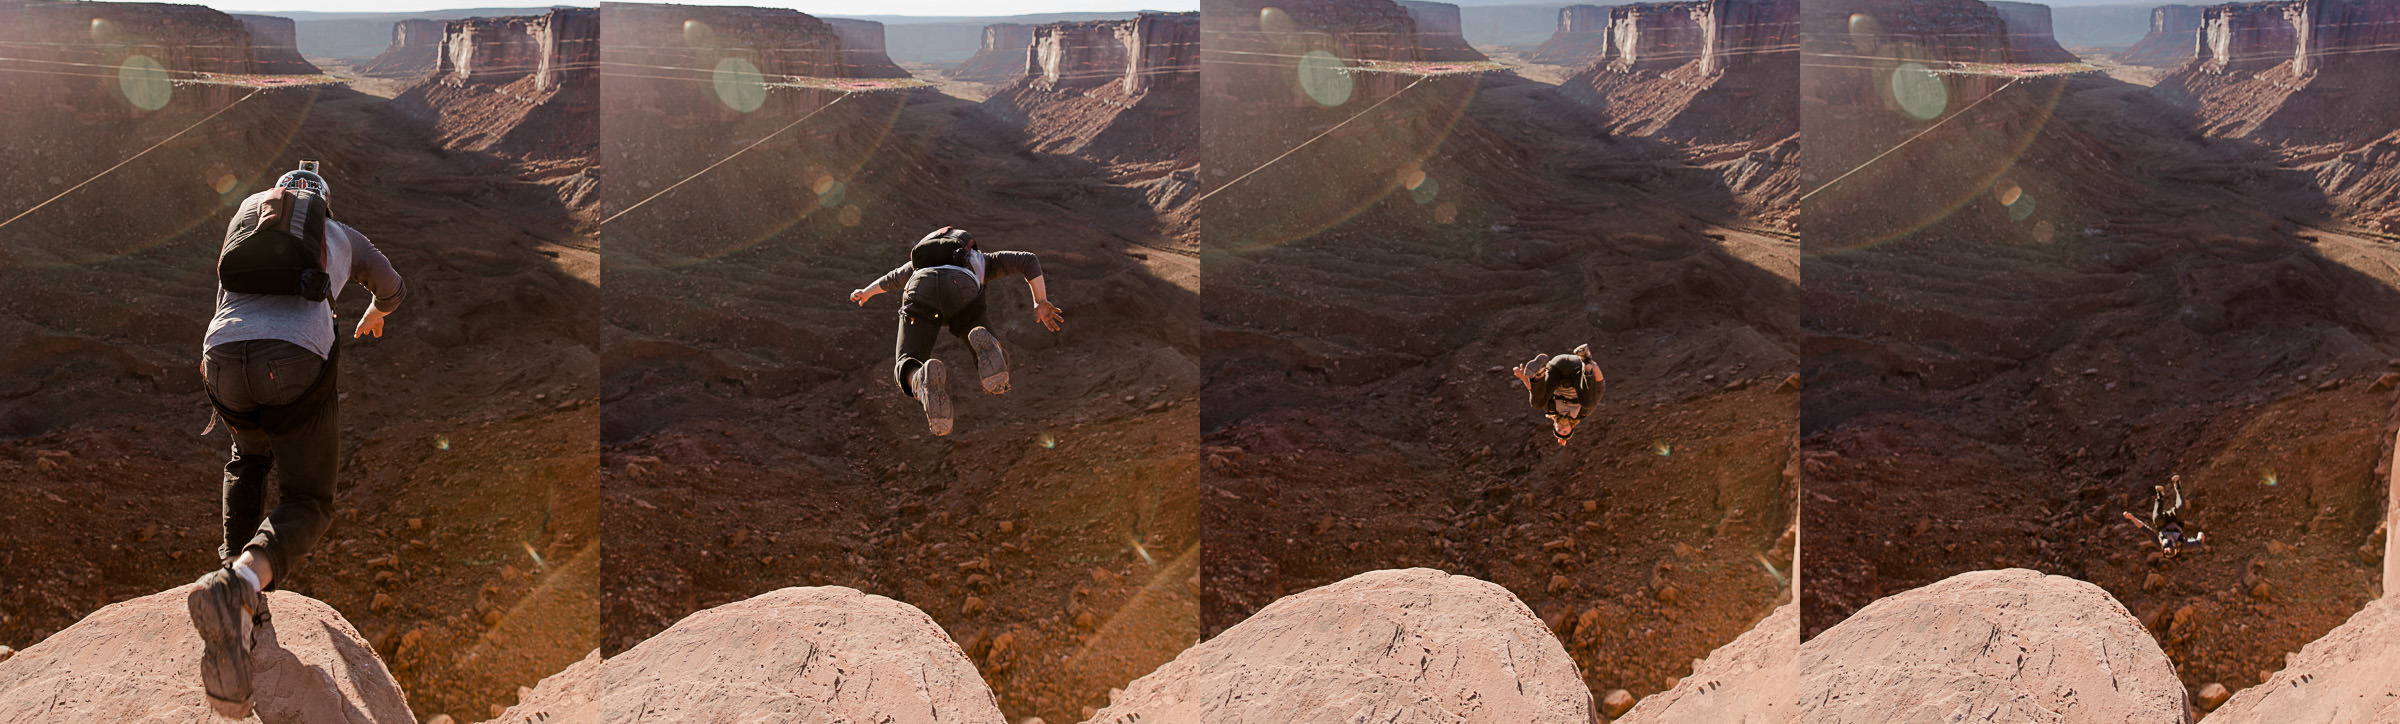 BASE jumping, Highlining, and Rock Climbing in Moab, Utah // extreme sports adventure photography // GGBY + Turkey Boogie 2016 // www.abbihearne.com